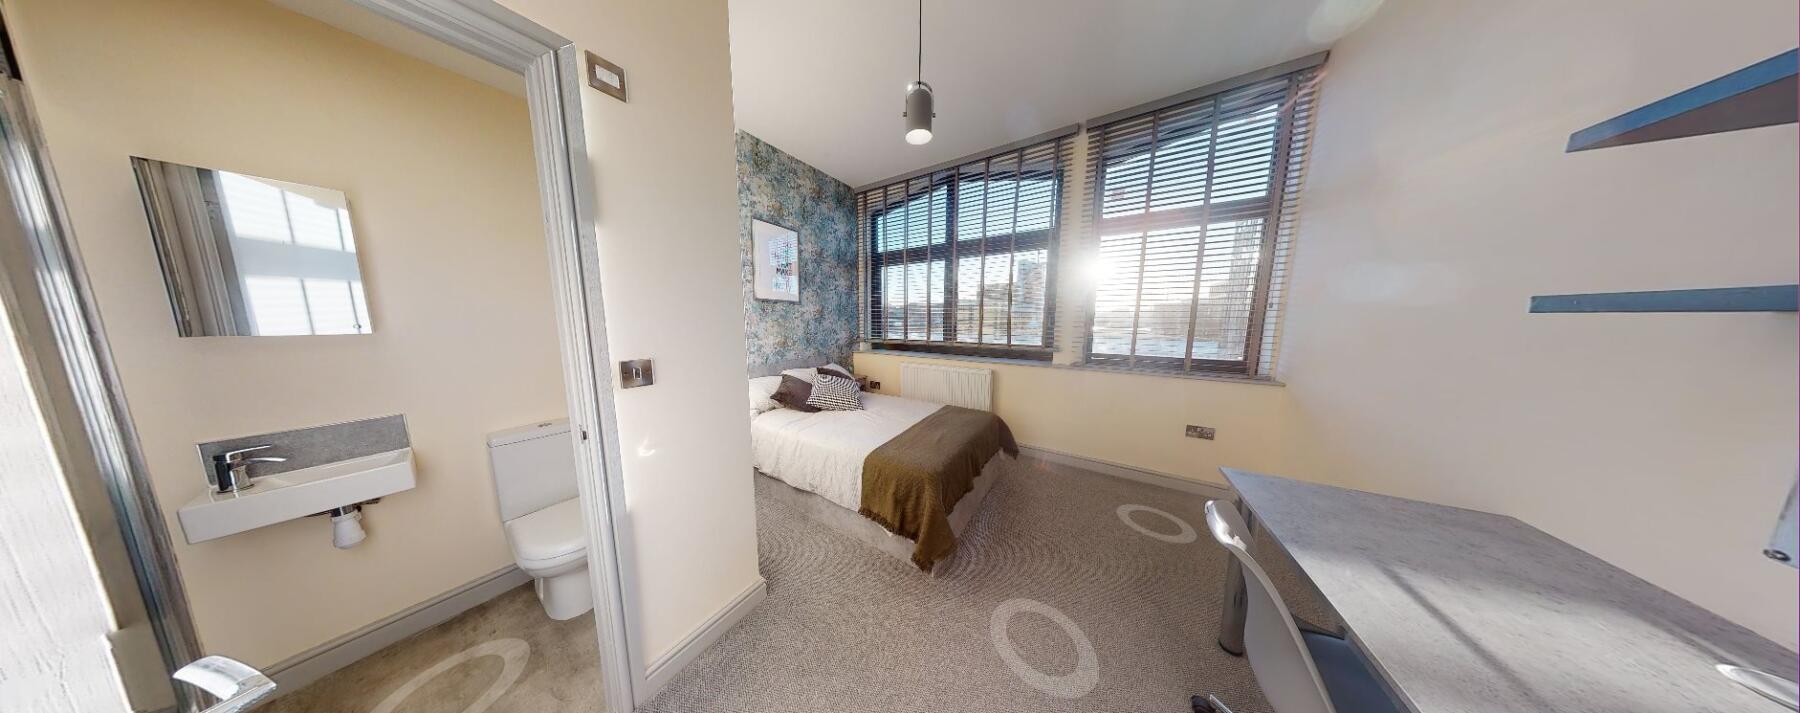 1 bed student accommodation in Lincoln · Available from 15th March 2023